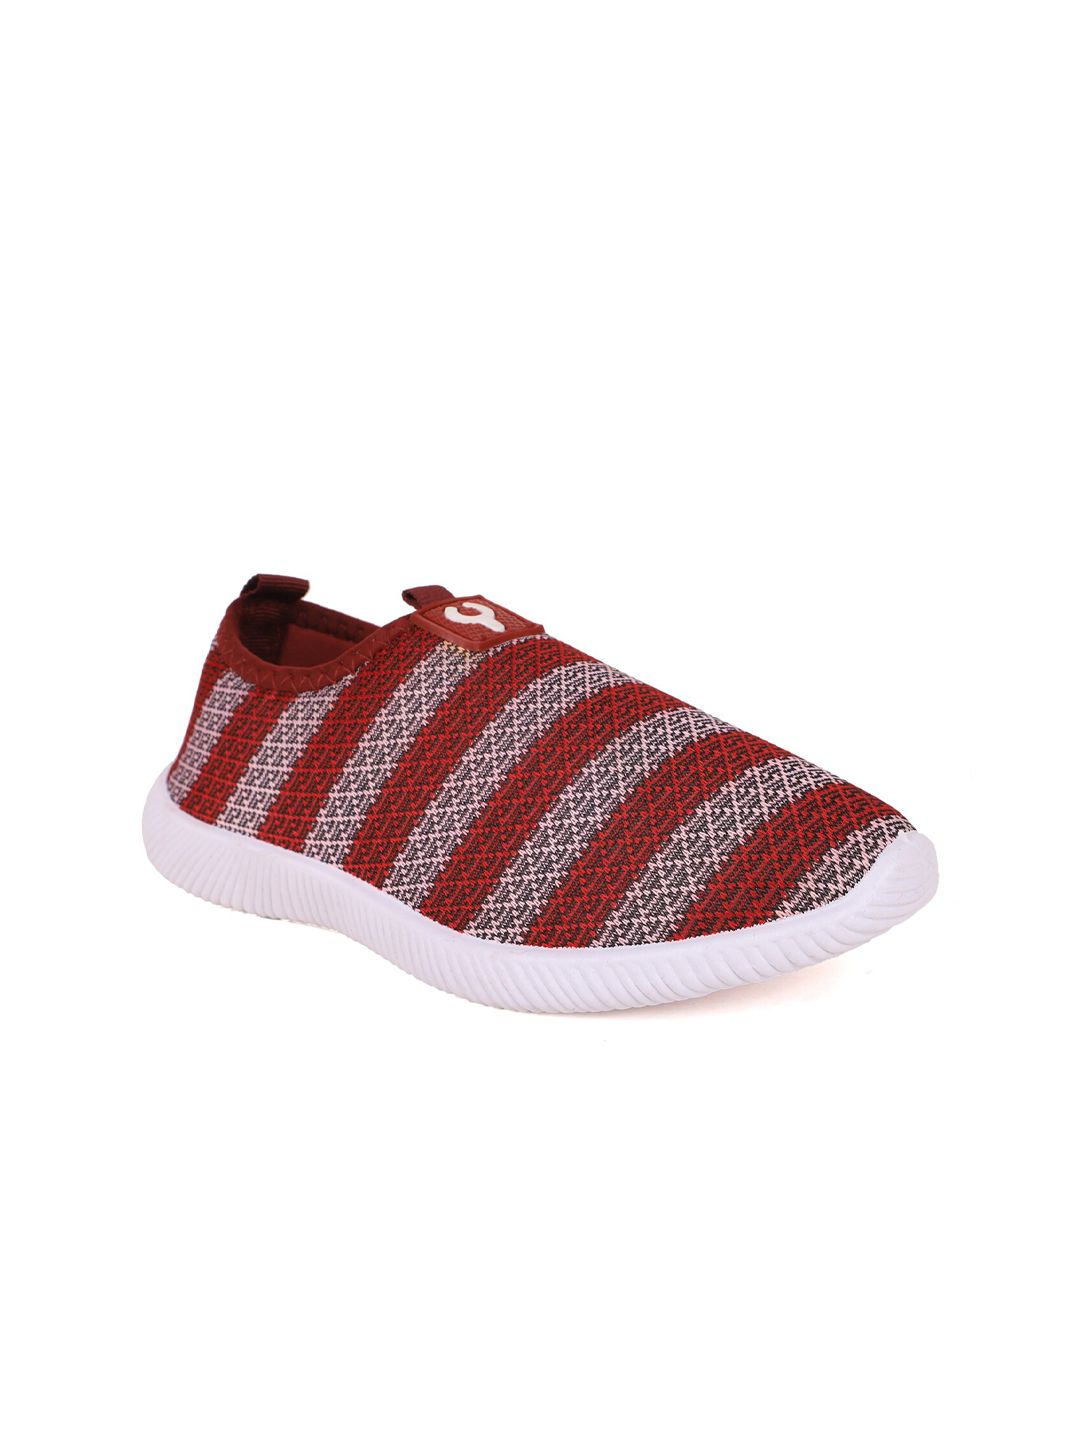 FABBMATE Women Red Walking Non-Marking Shoes Price in India